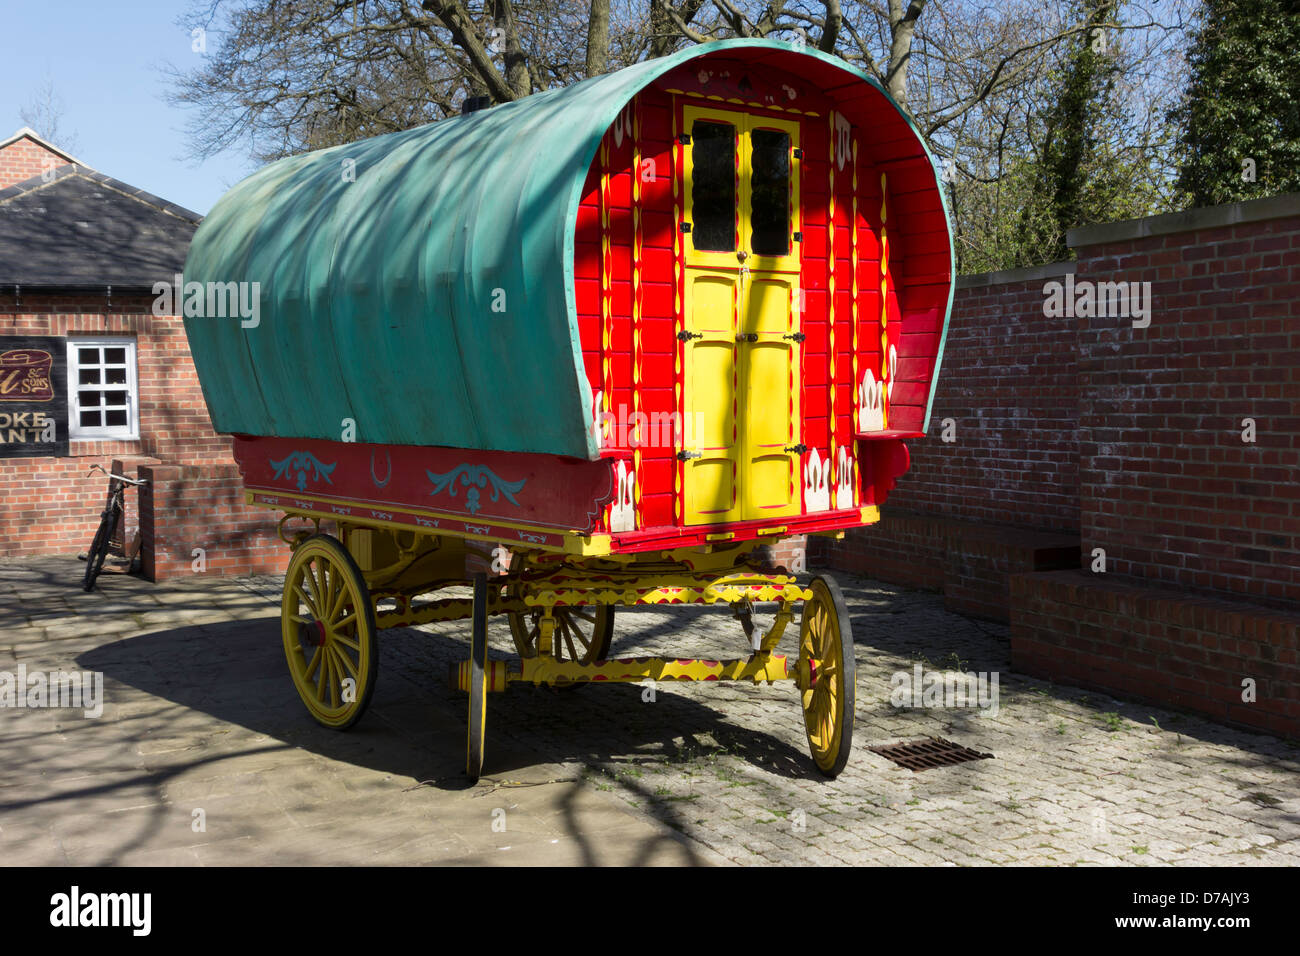 A red and yellow early 20th Century Gypsy caravan on display at Preston ...